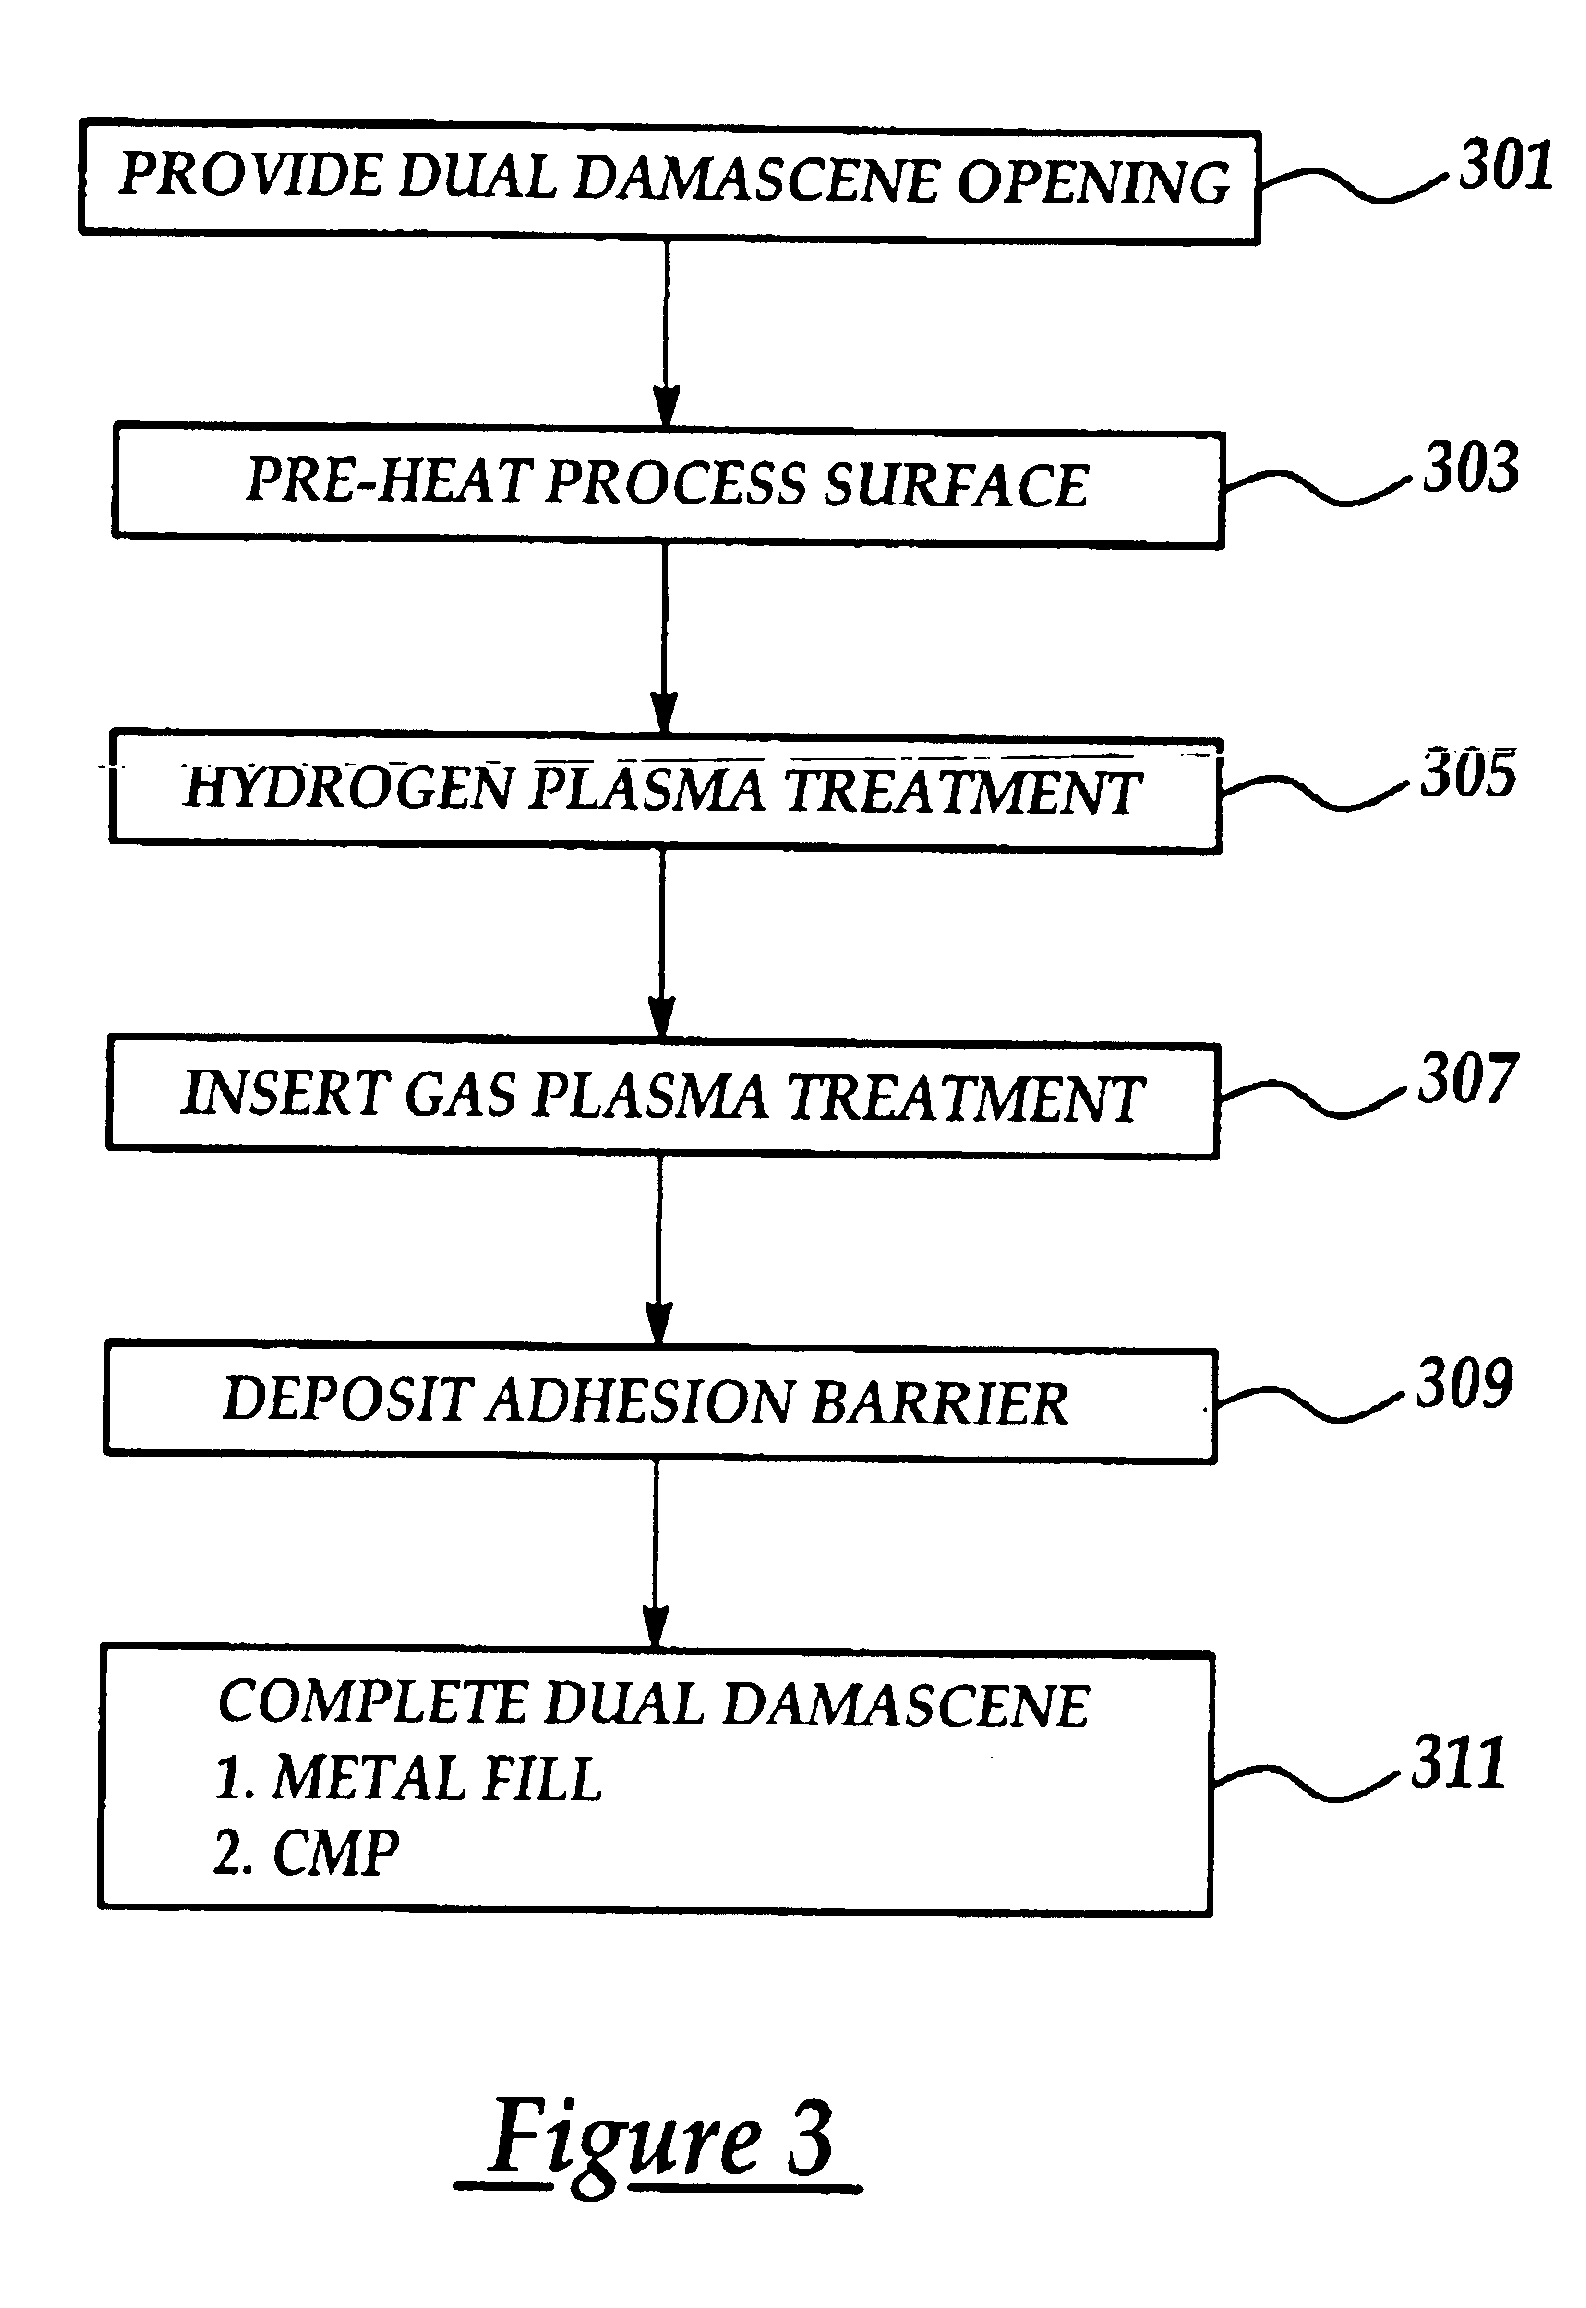 Method for preventing low-k dielectric layer cracking in multi-layered dual damascene metallization layers